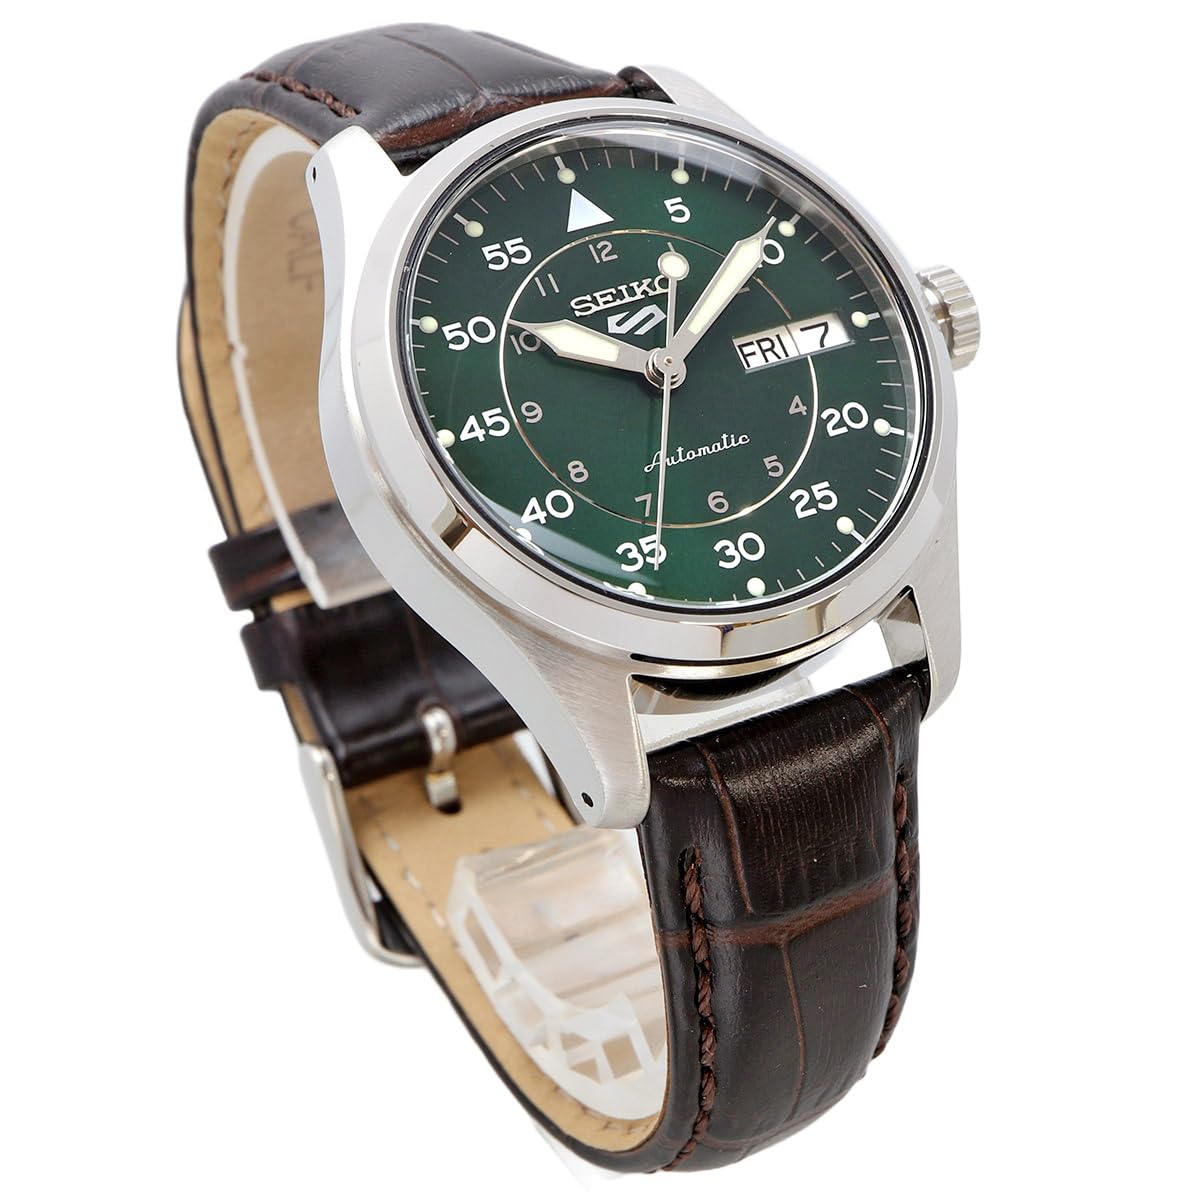 Seiko SRPJ89 Sports Field Suits Style Five Sports Automatic Men's Watch, Made in Japan, Brown Leather, Overseas Model